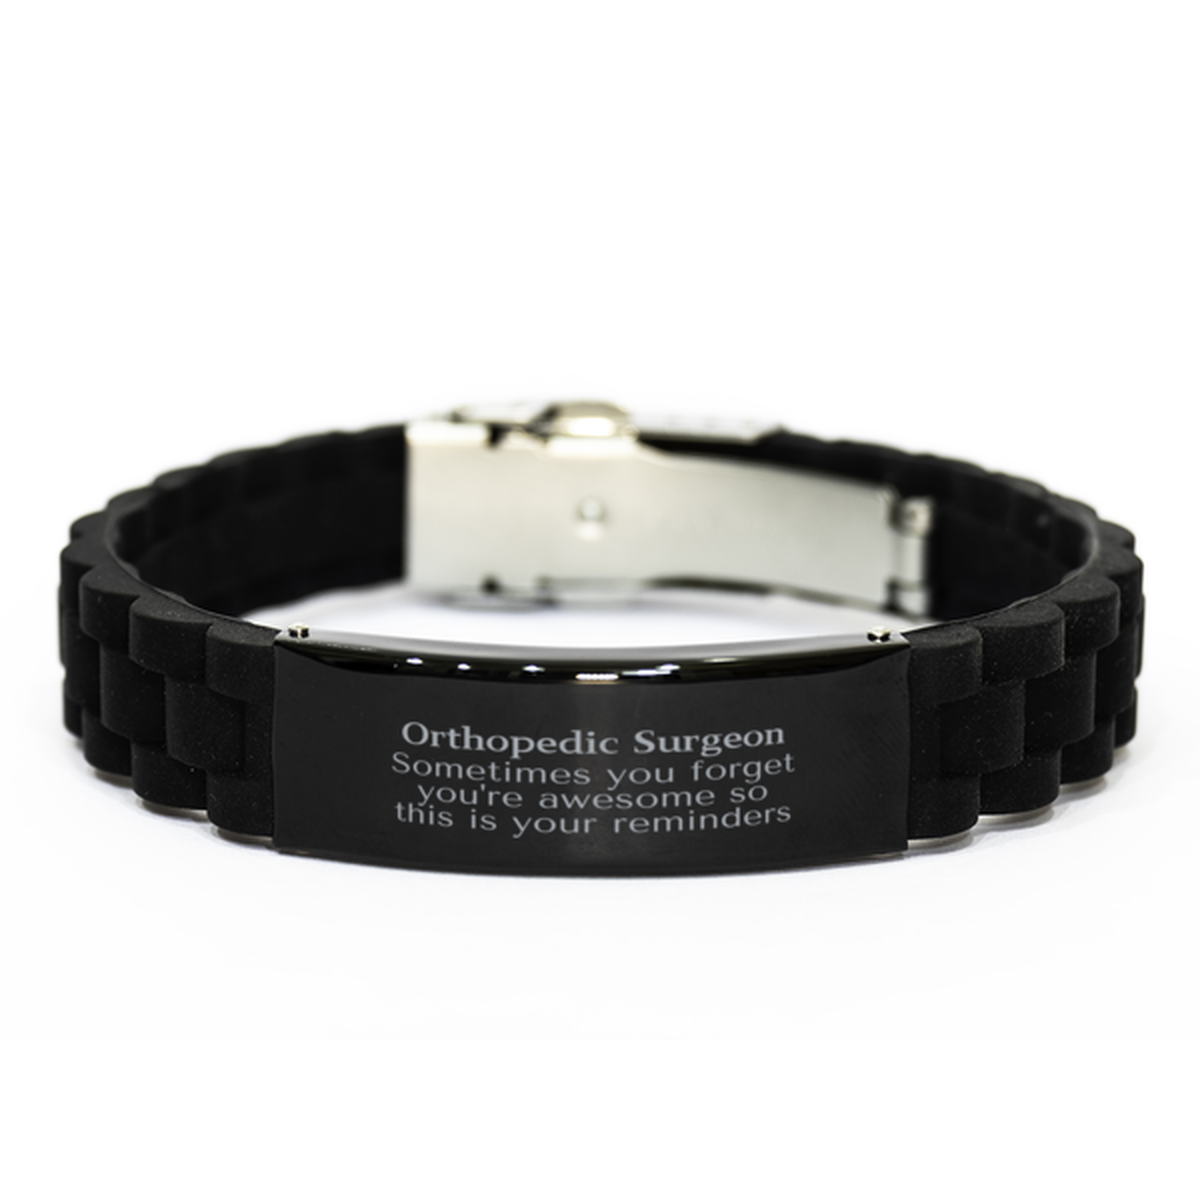 Sentimental Orthopedic Surgeon Black Glidelock Clasp Bracelet, Orthopedic Surgeon Sometimes you forget you're awesome so this is your reminders, Graduation Christmas Birthday Gifts for Orthopedic Surgeon, Men, Women, Coworkers